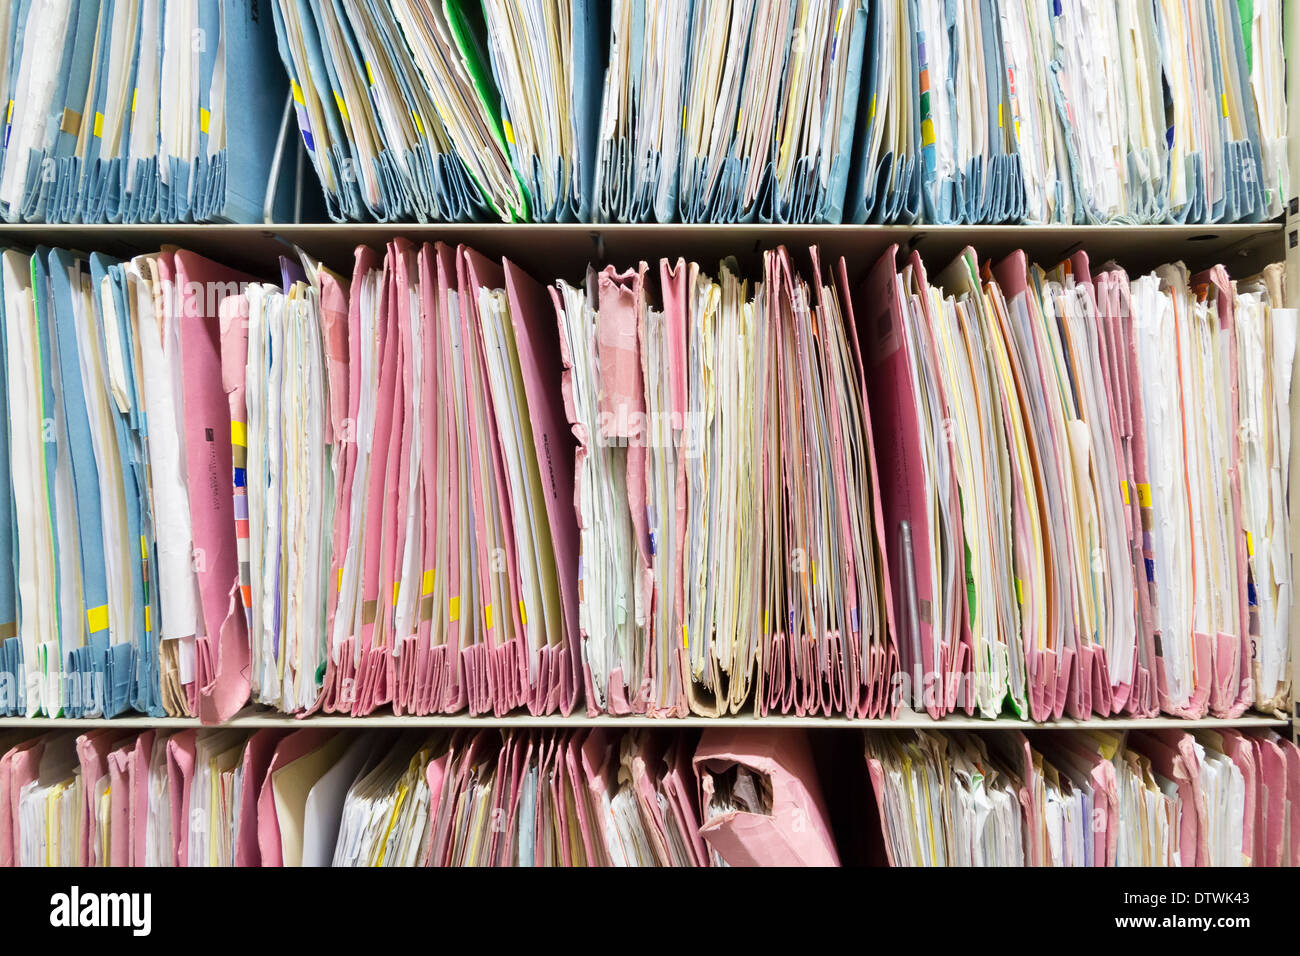 Paper files at a UK hospital Stock Photo